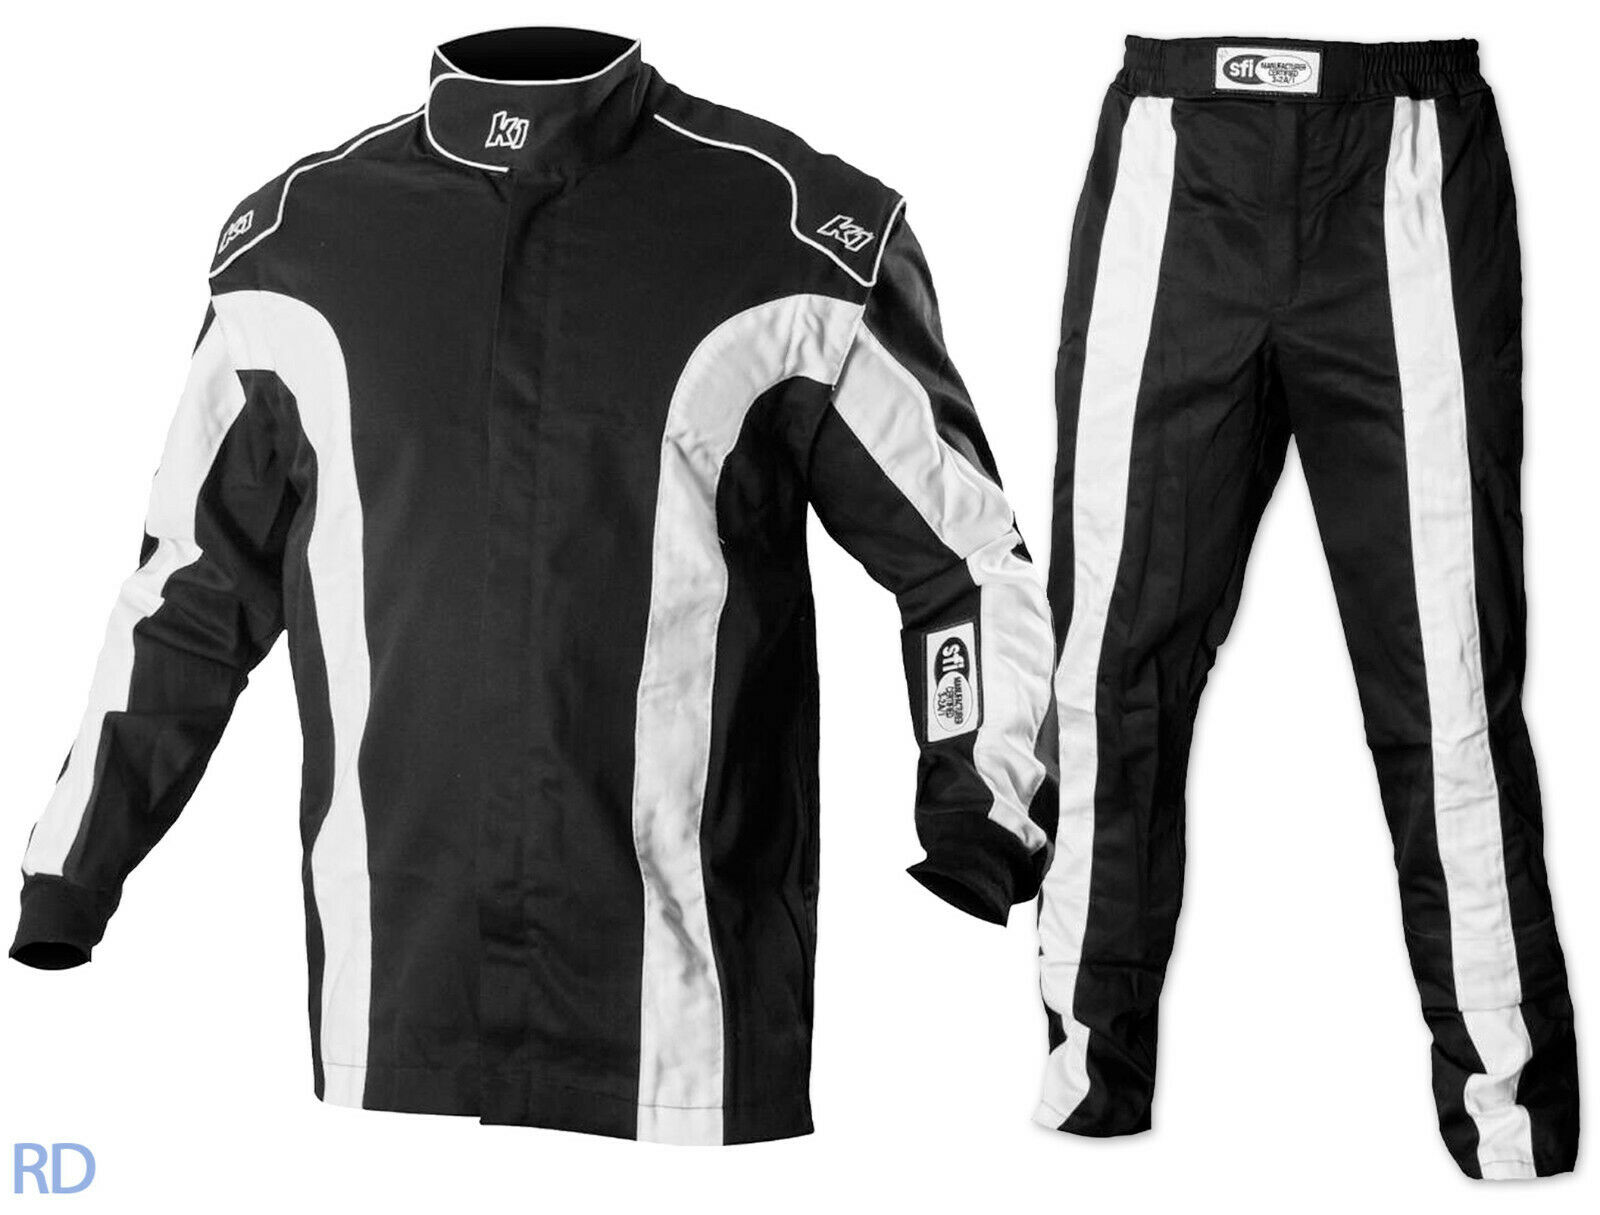 K1 Tr2 Triumph Sfi-1 2-piece Auto Racing Suit - Jacket And Pants 3.2a/1 Rated